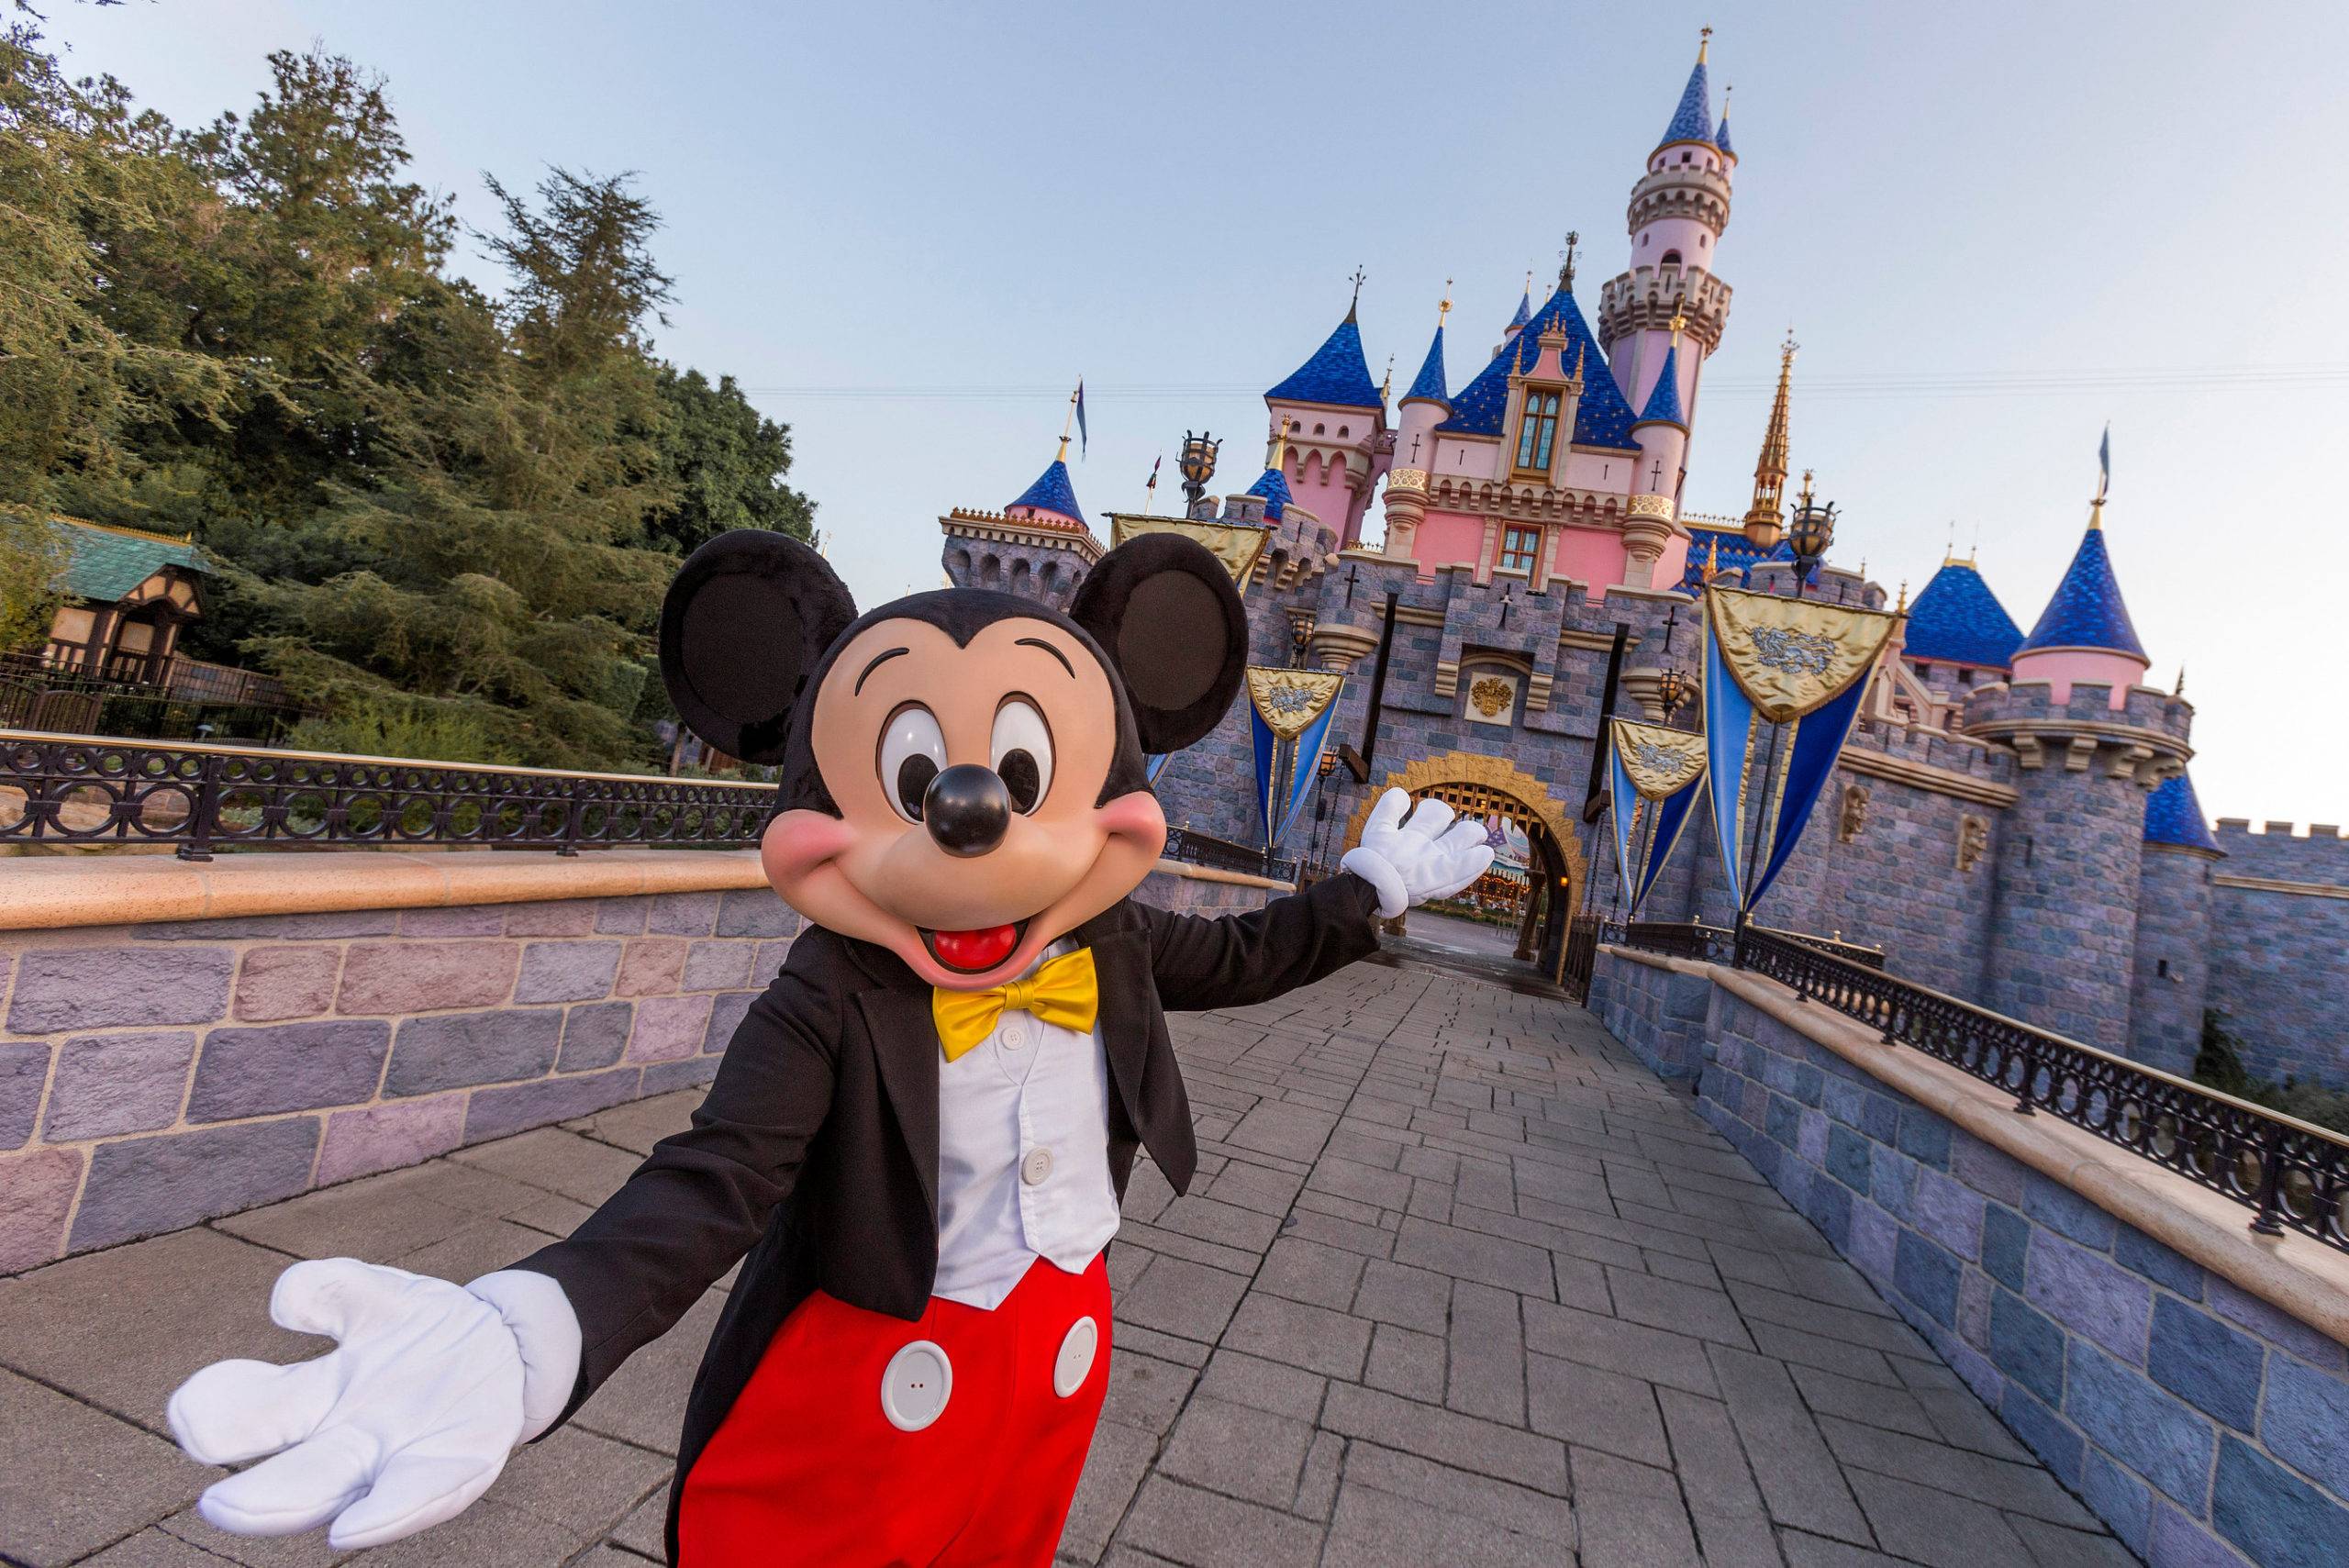 Disneyland will be open to guests from outside of its home state from June 15